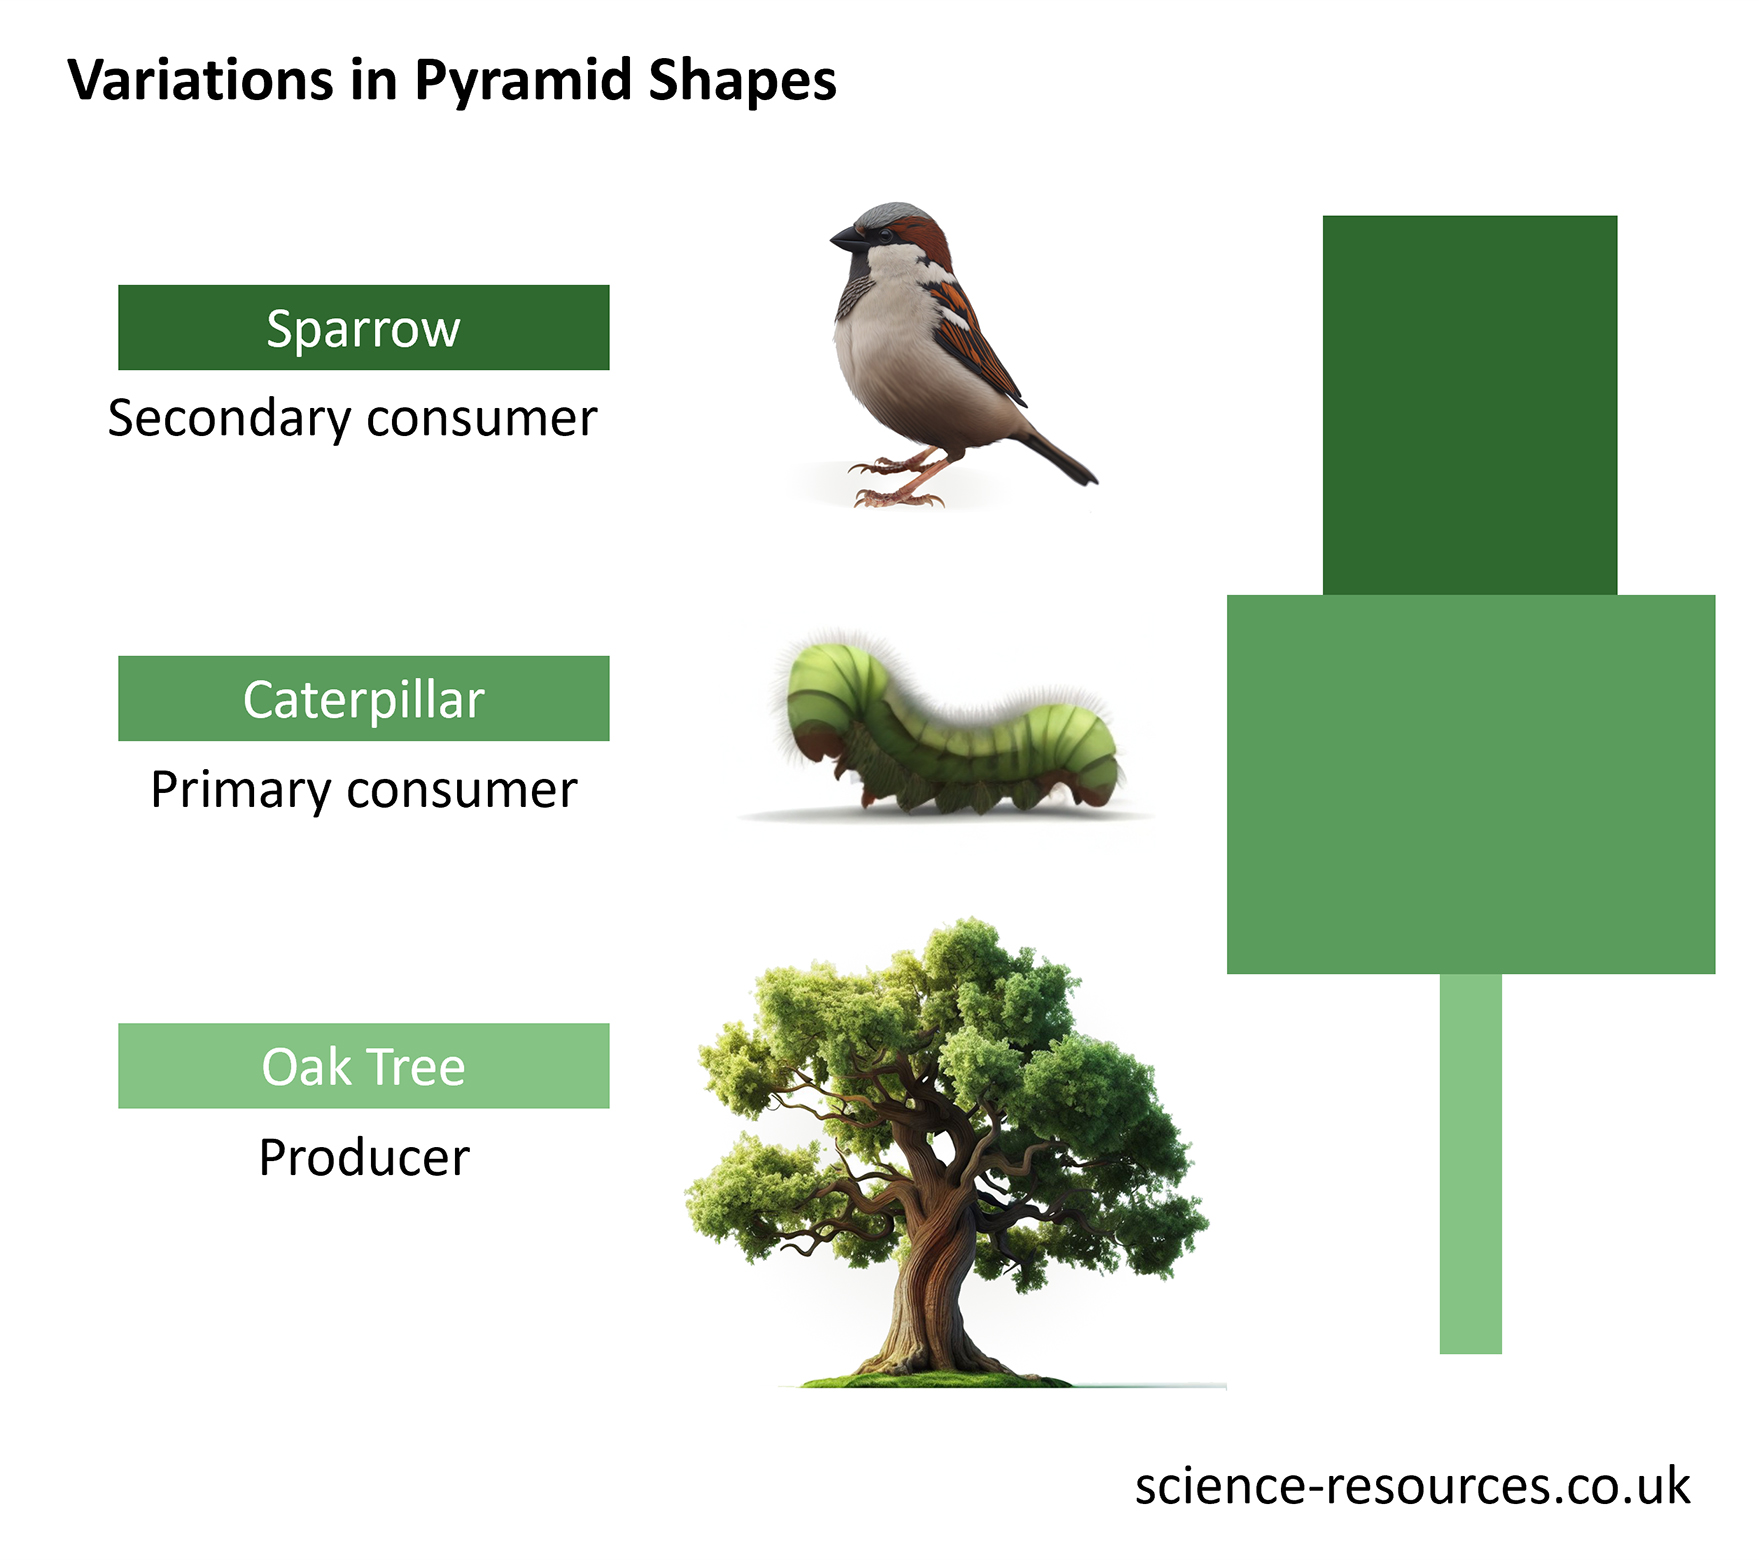 This image is a diagram representing variations in pyramid shapes, illustrating the food chain from producer to secondary consumer. It shows an oak tree as the producer, a caterpillar as the primary consumer, and a sparrow as the secondary consumer. 